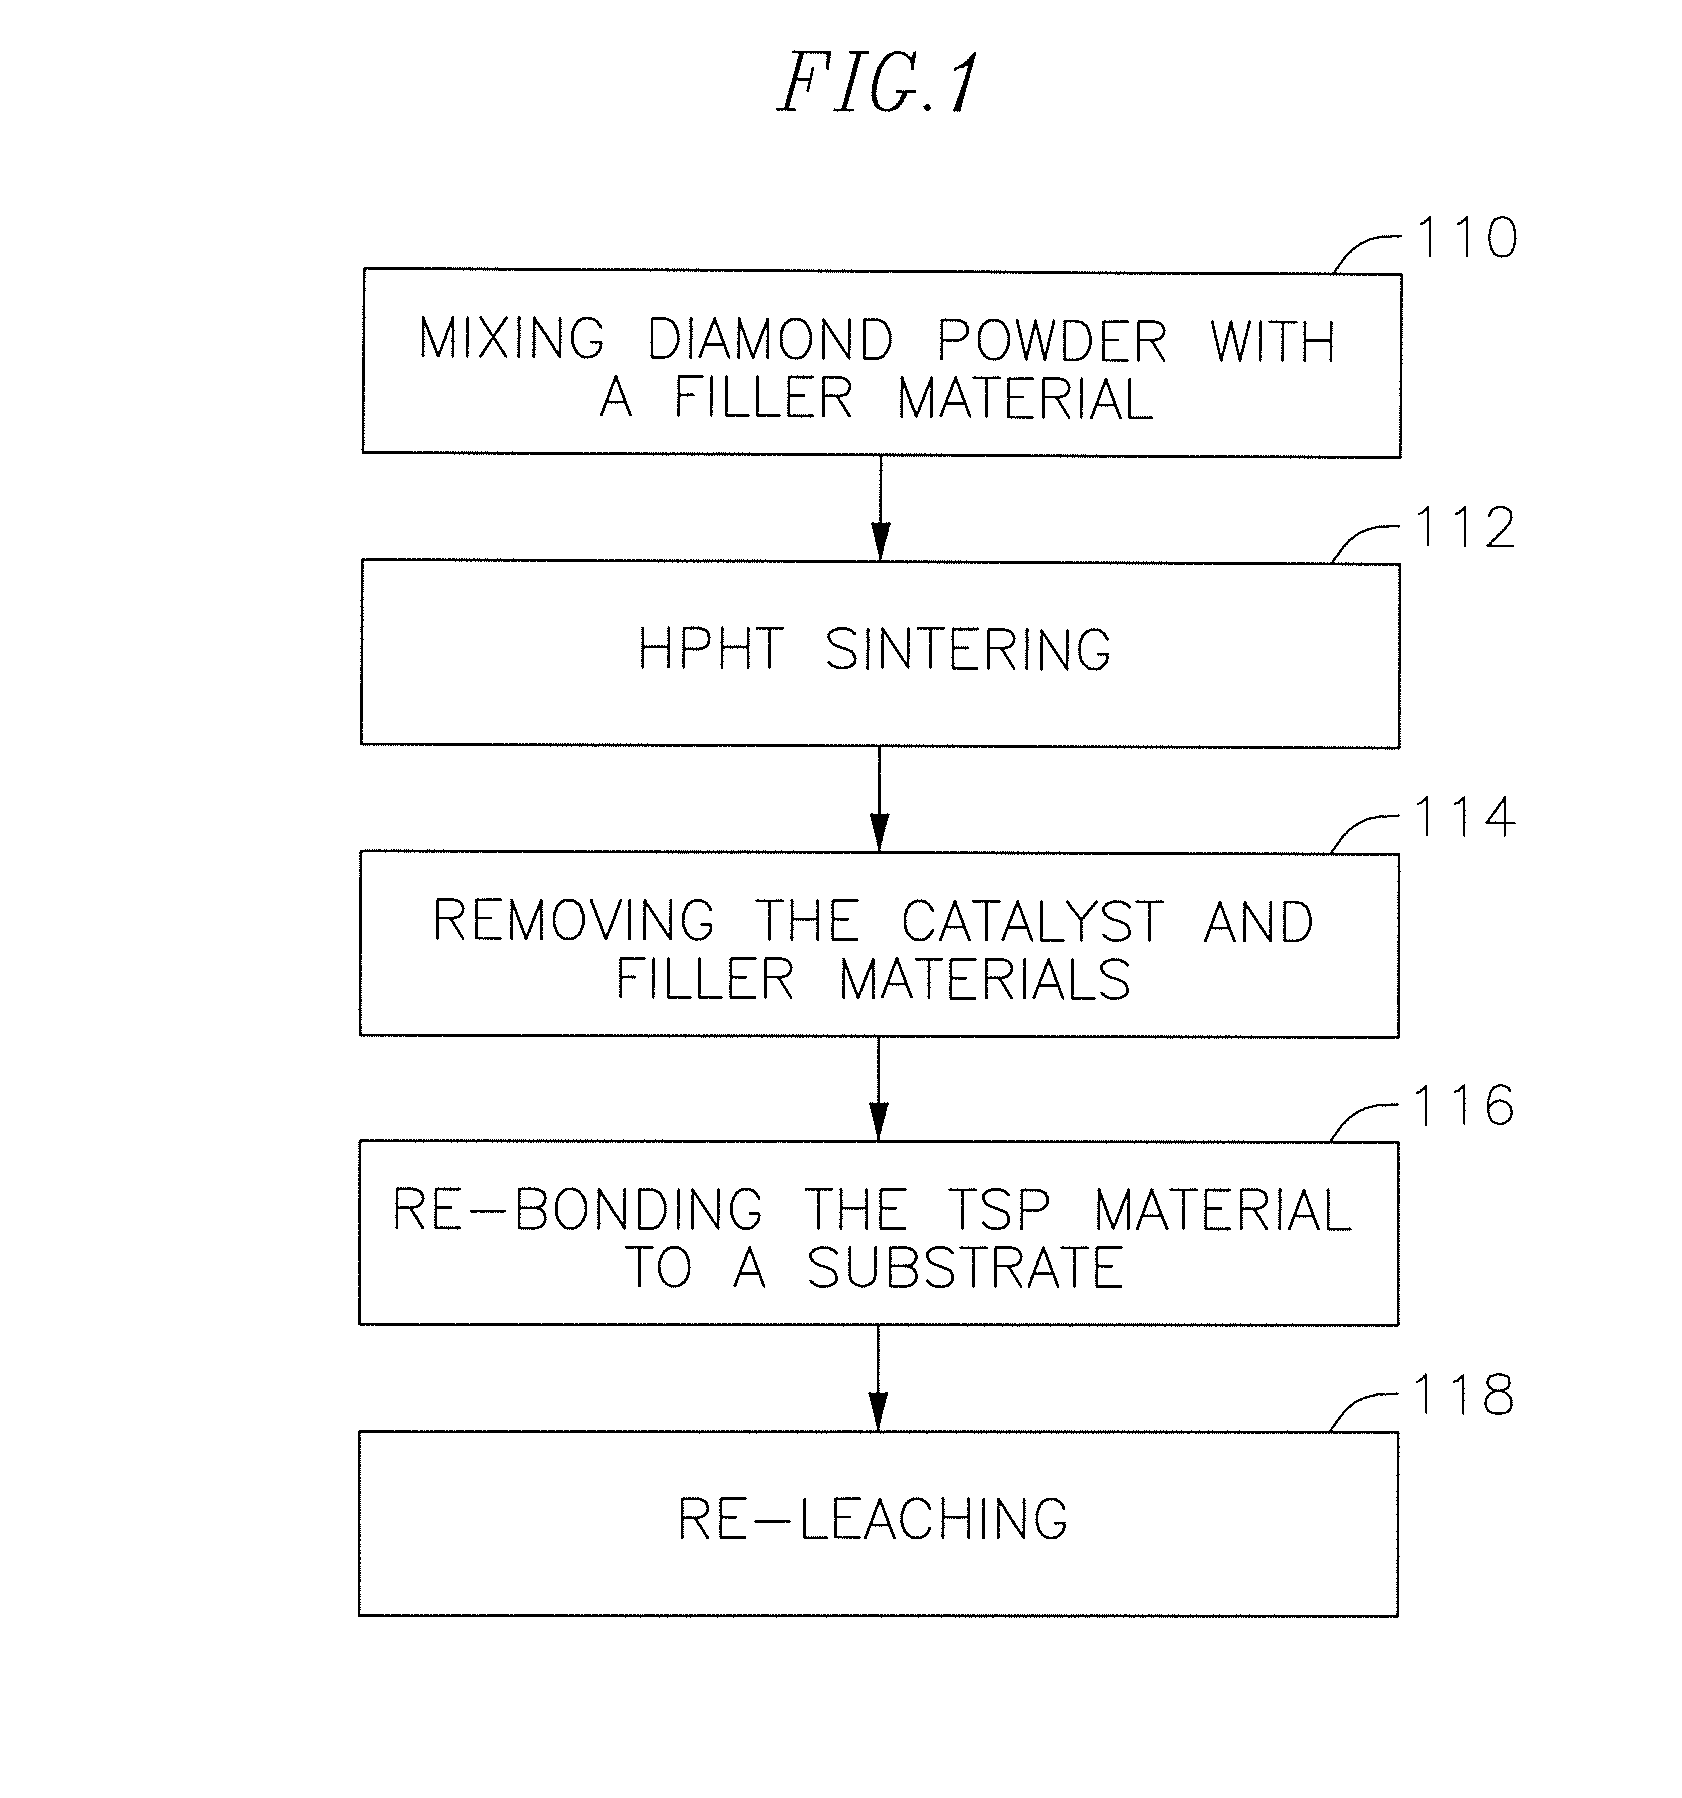 Polycrystalline diamond cutting elements with engineered porosity and method for manufacturing such cutting elements